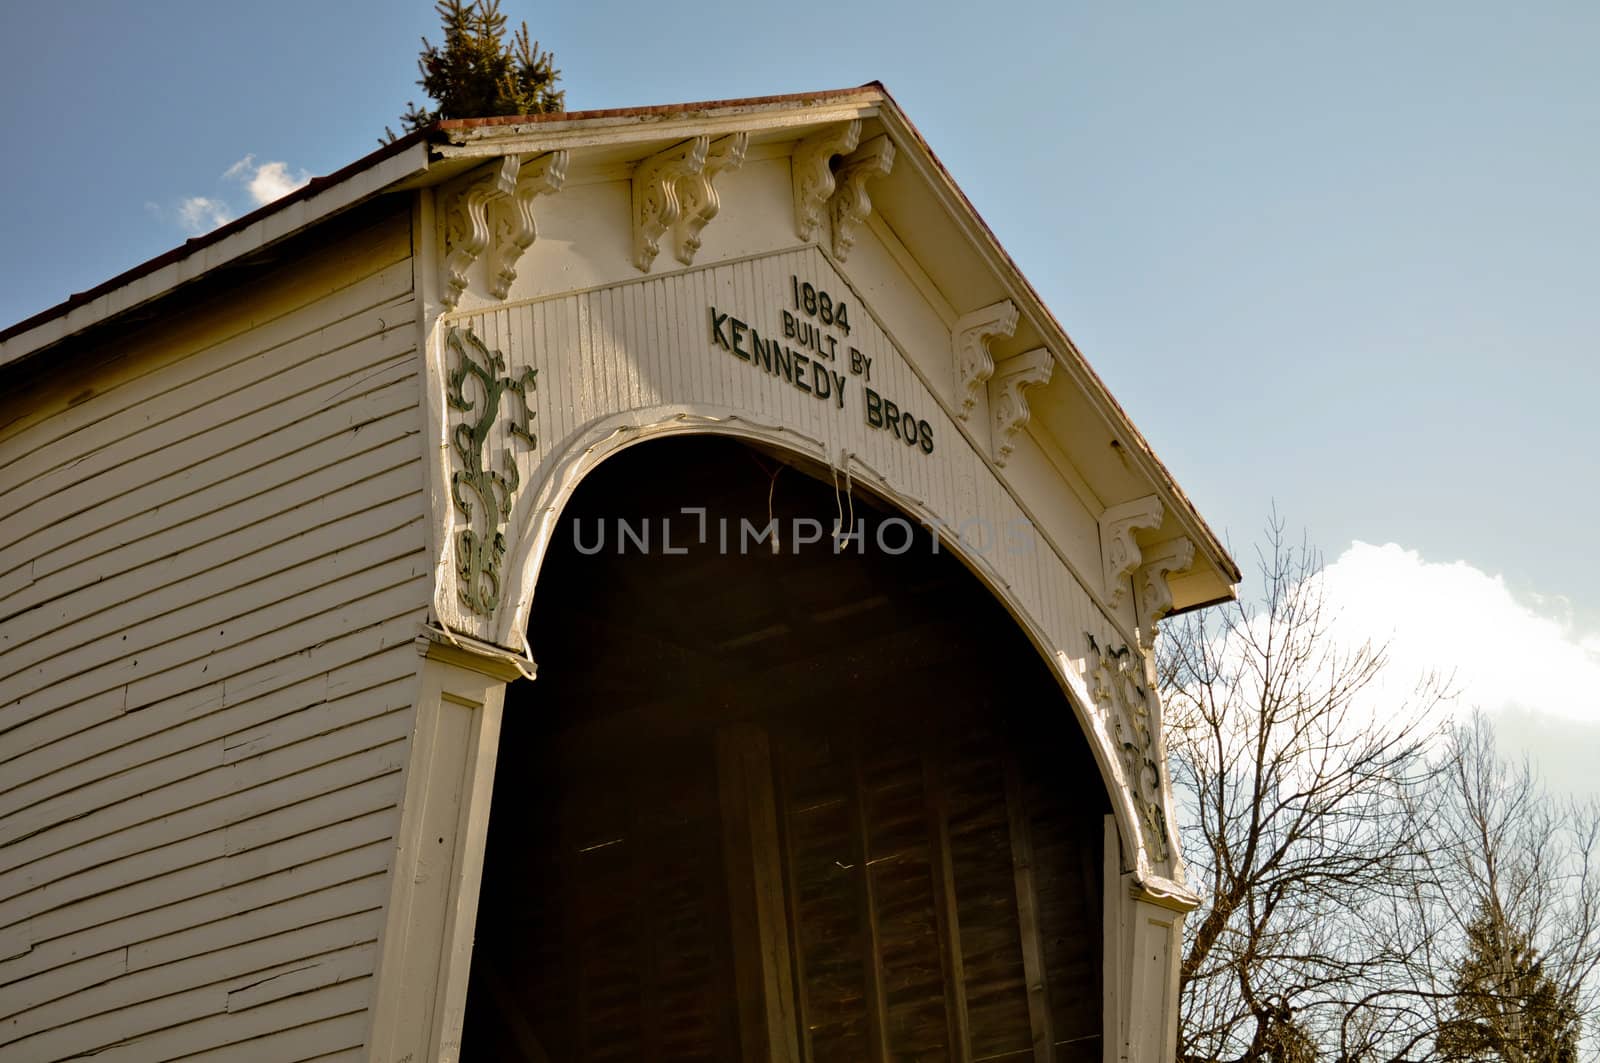 Kennedy Bros Covered Bridge Connersville Indiana 2 by RefocusPhoto